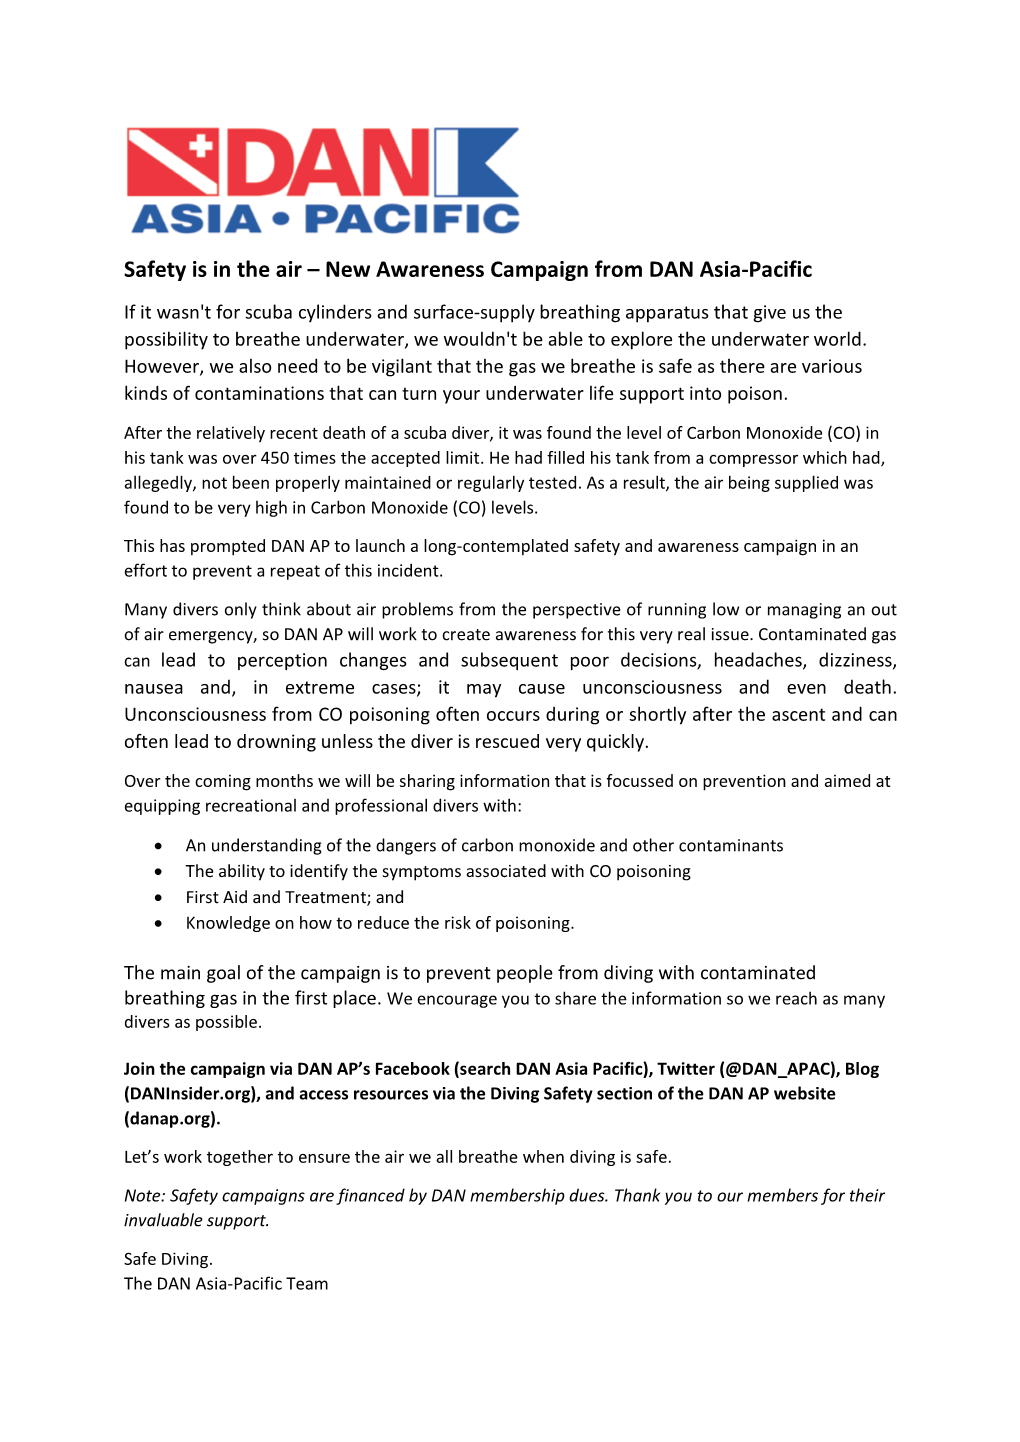 Safety Is in the Air – New Awareness Campaign from DAN Asia-Pacific